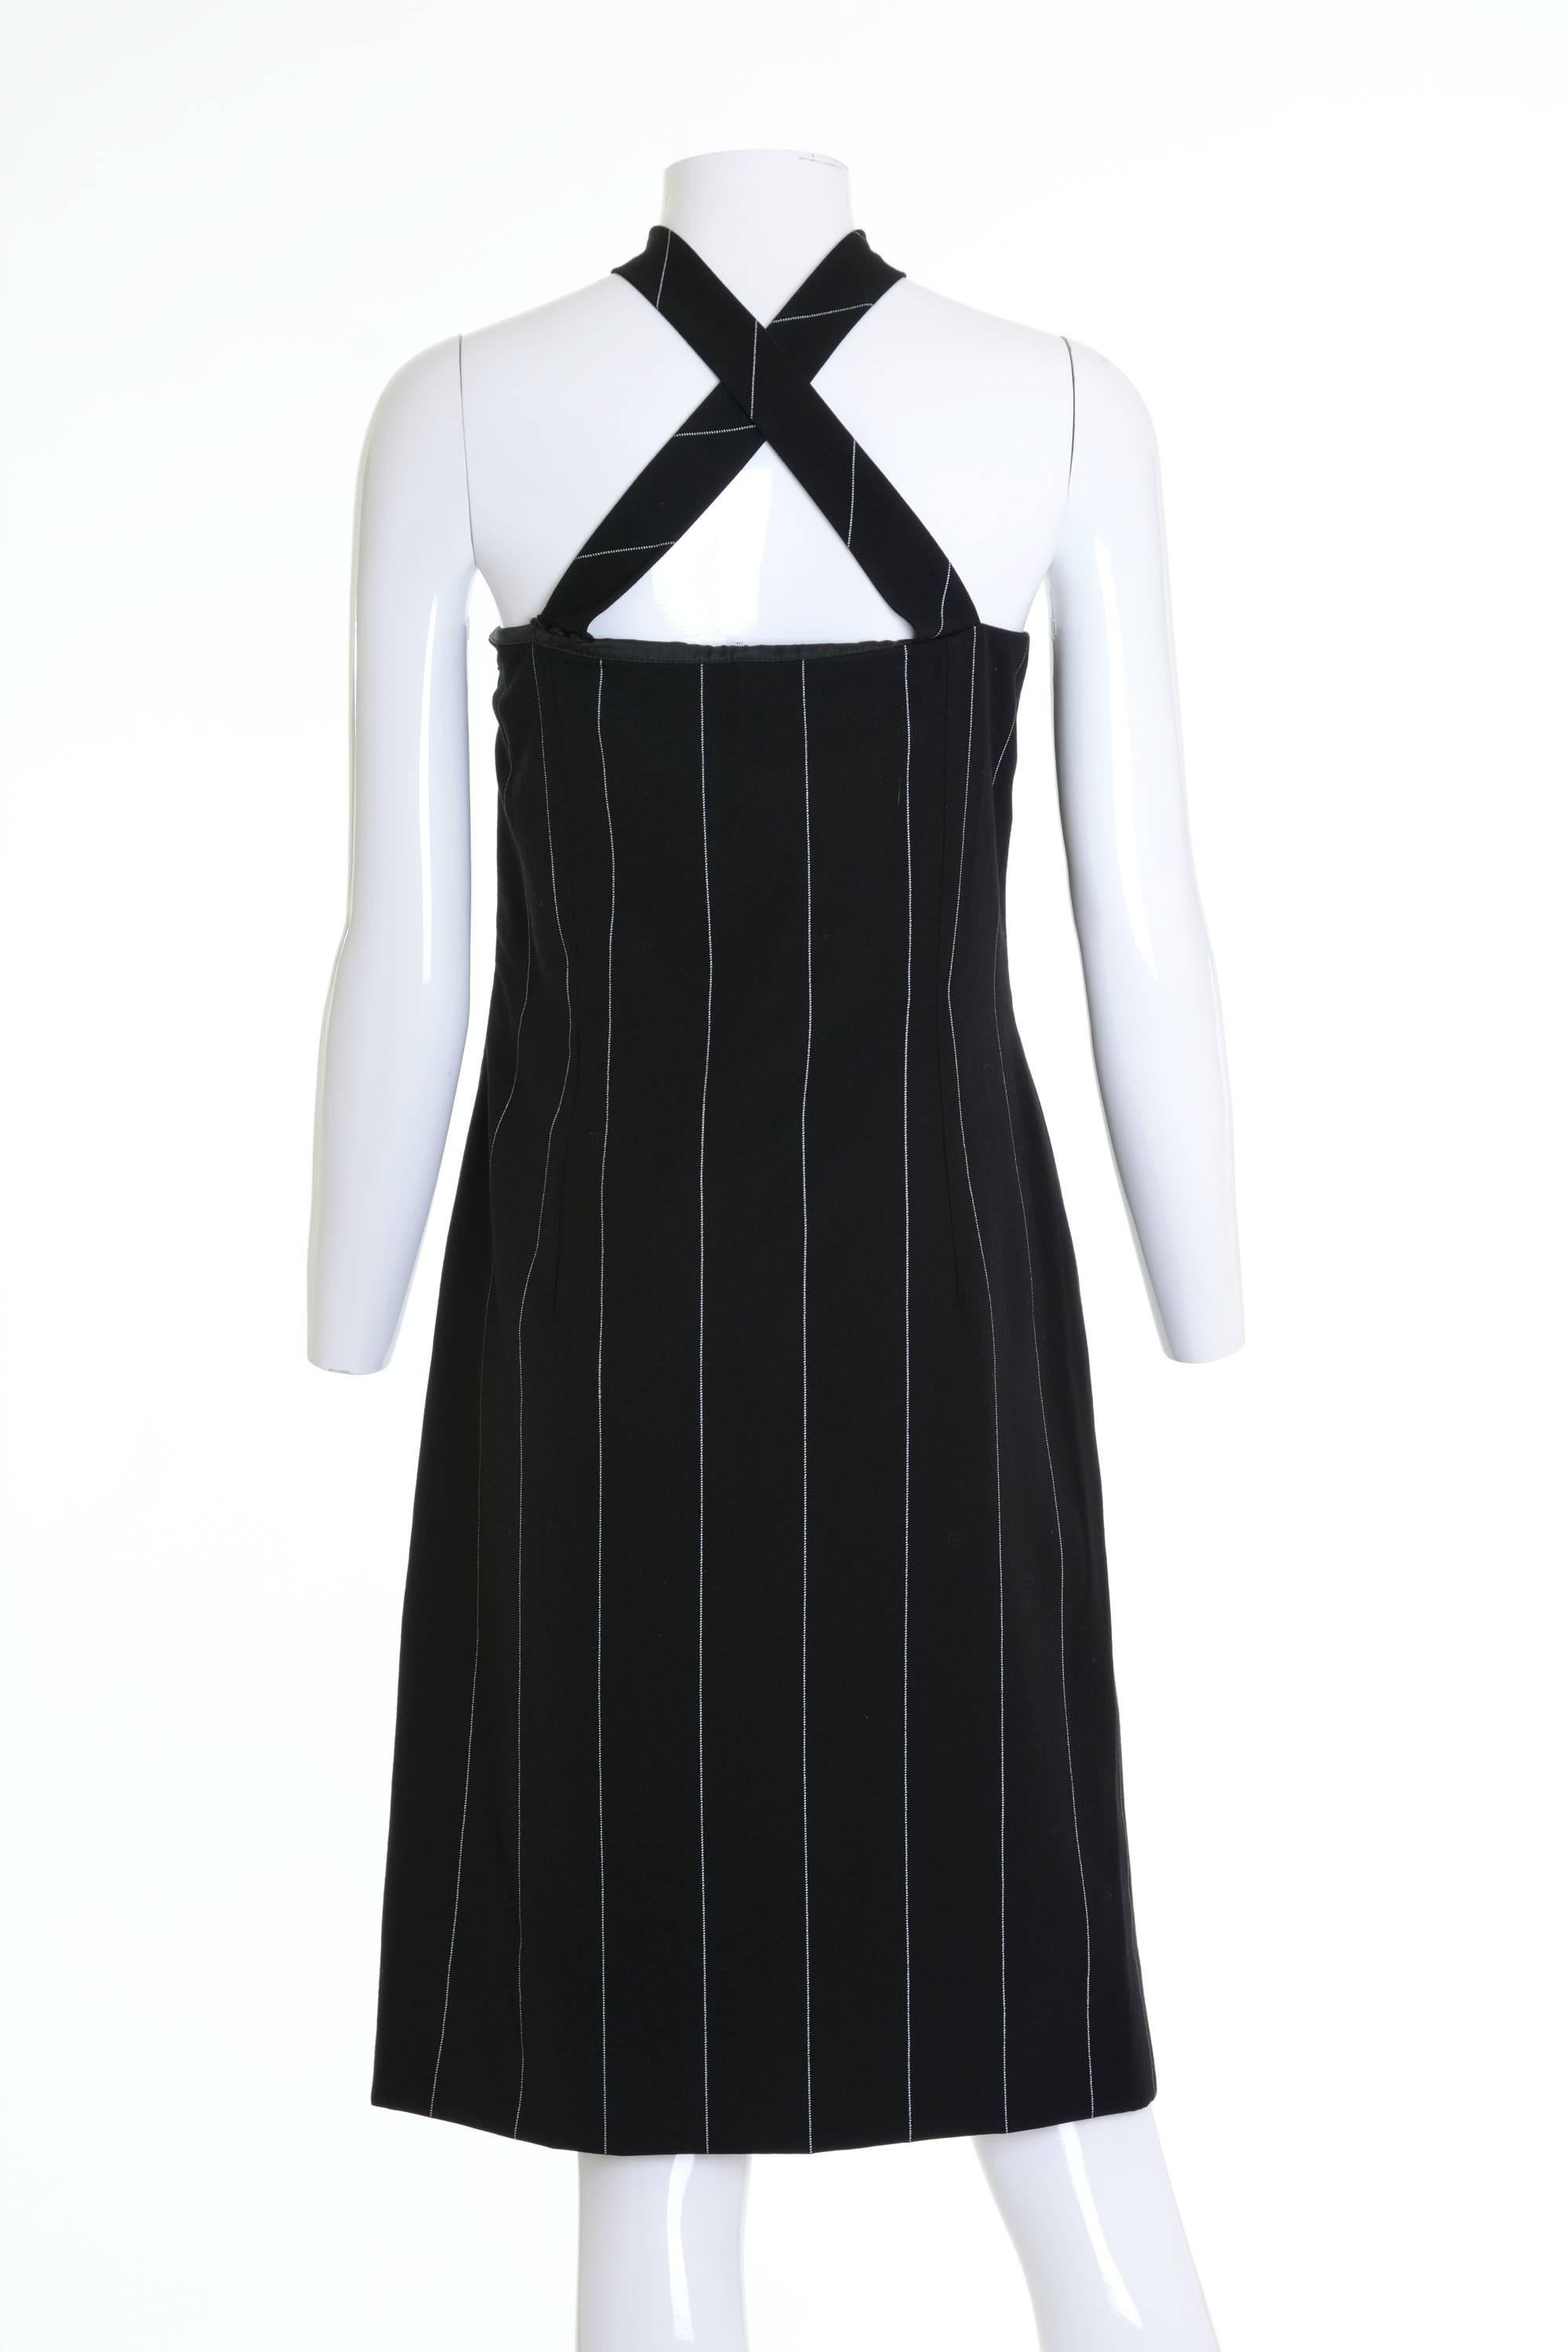 1980-1990s GIANNI VERSACE Couture pinstripe dress strapless with a built in boned corset underneath and a wrap neckline embellishment adding drama to the simple sheath design. Side zip closure, and is fully lined 

Excellent Vintage Condition